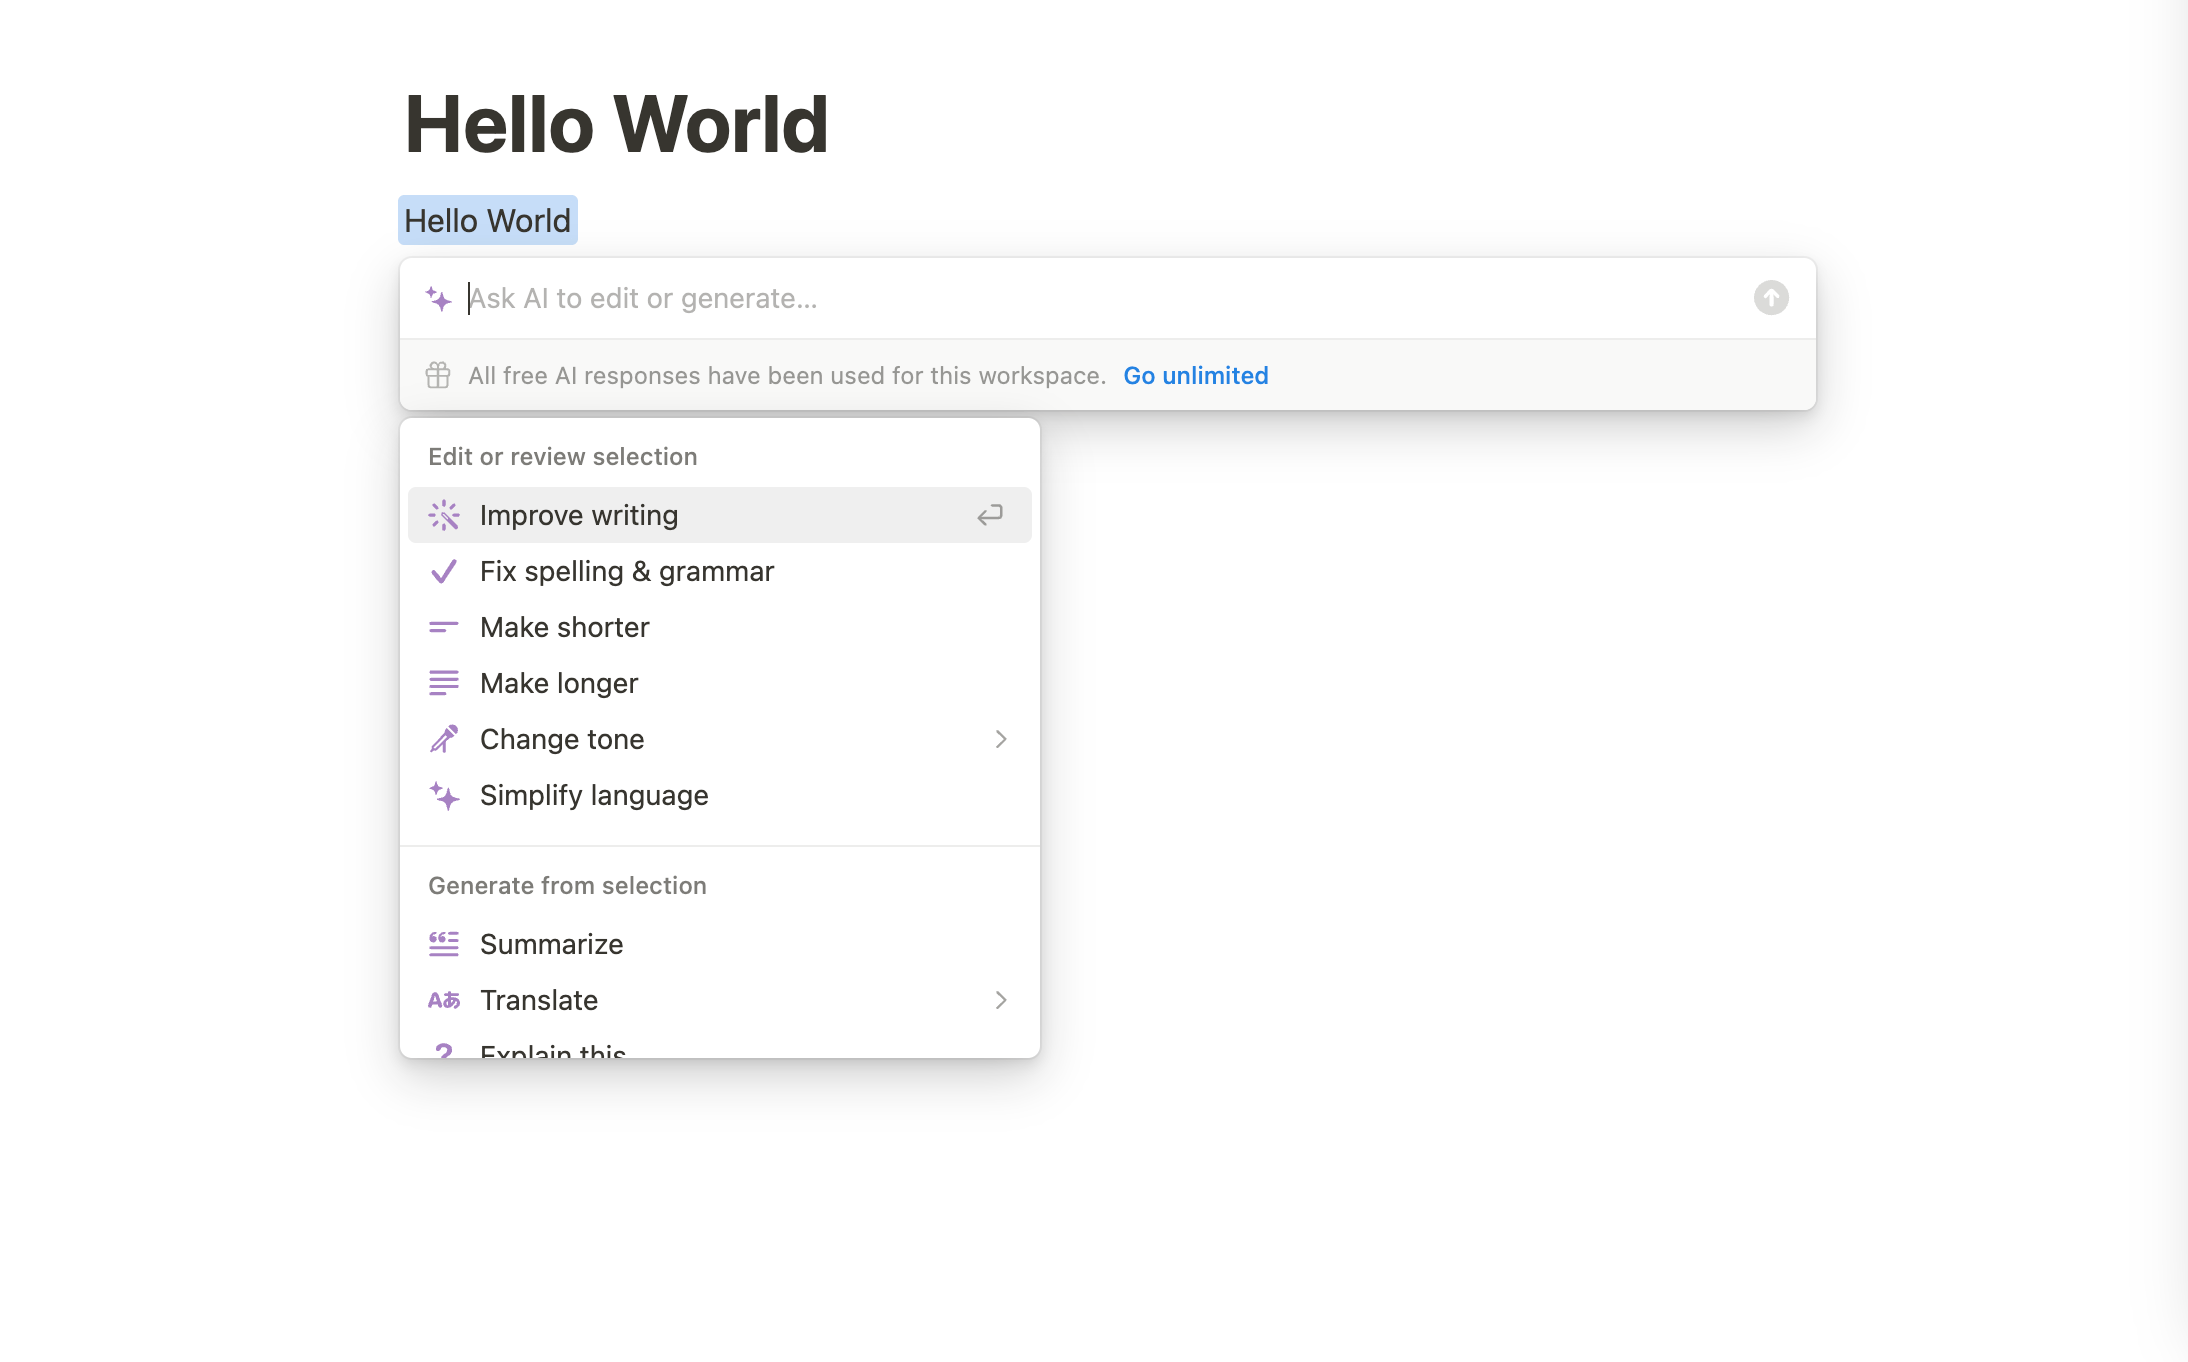 notion has a Hello World screen with a text bar that has a menu with a category for edit or review selection - improve writing, fix spelling & grammar, etc. and generate from selection - summarize, translate, etc.